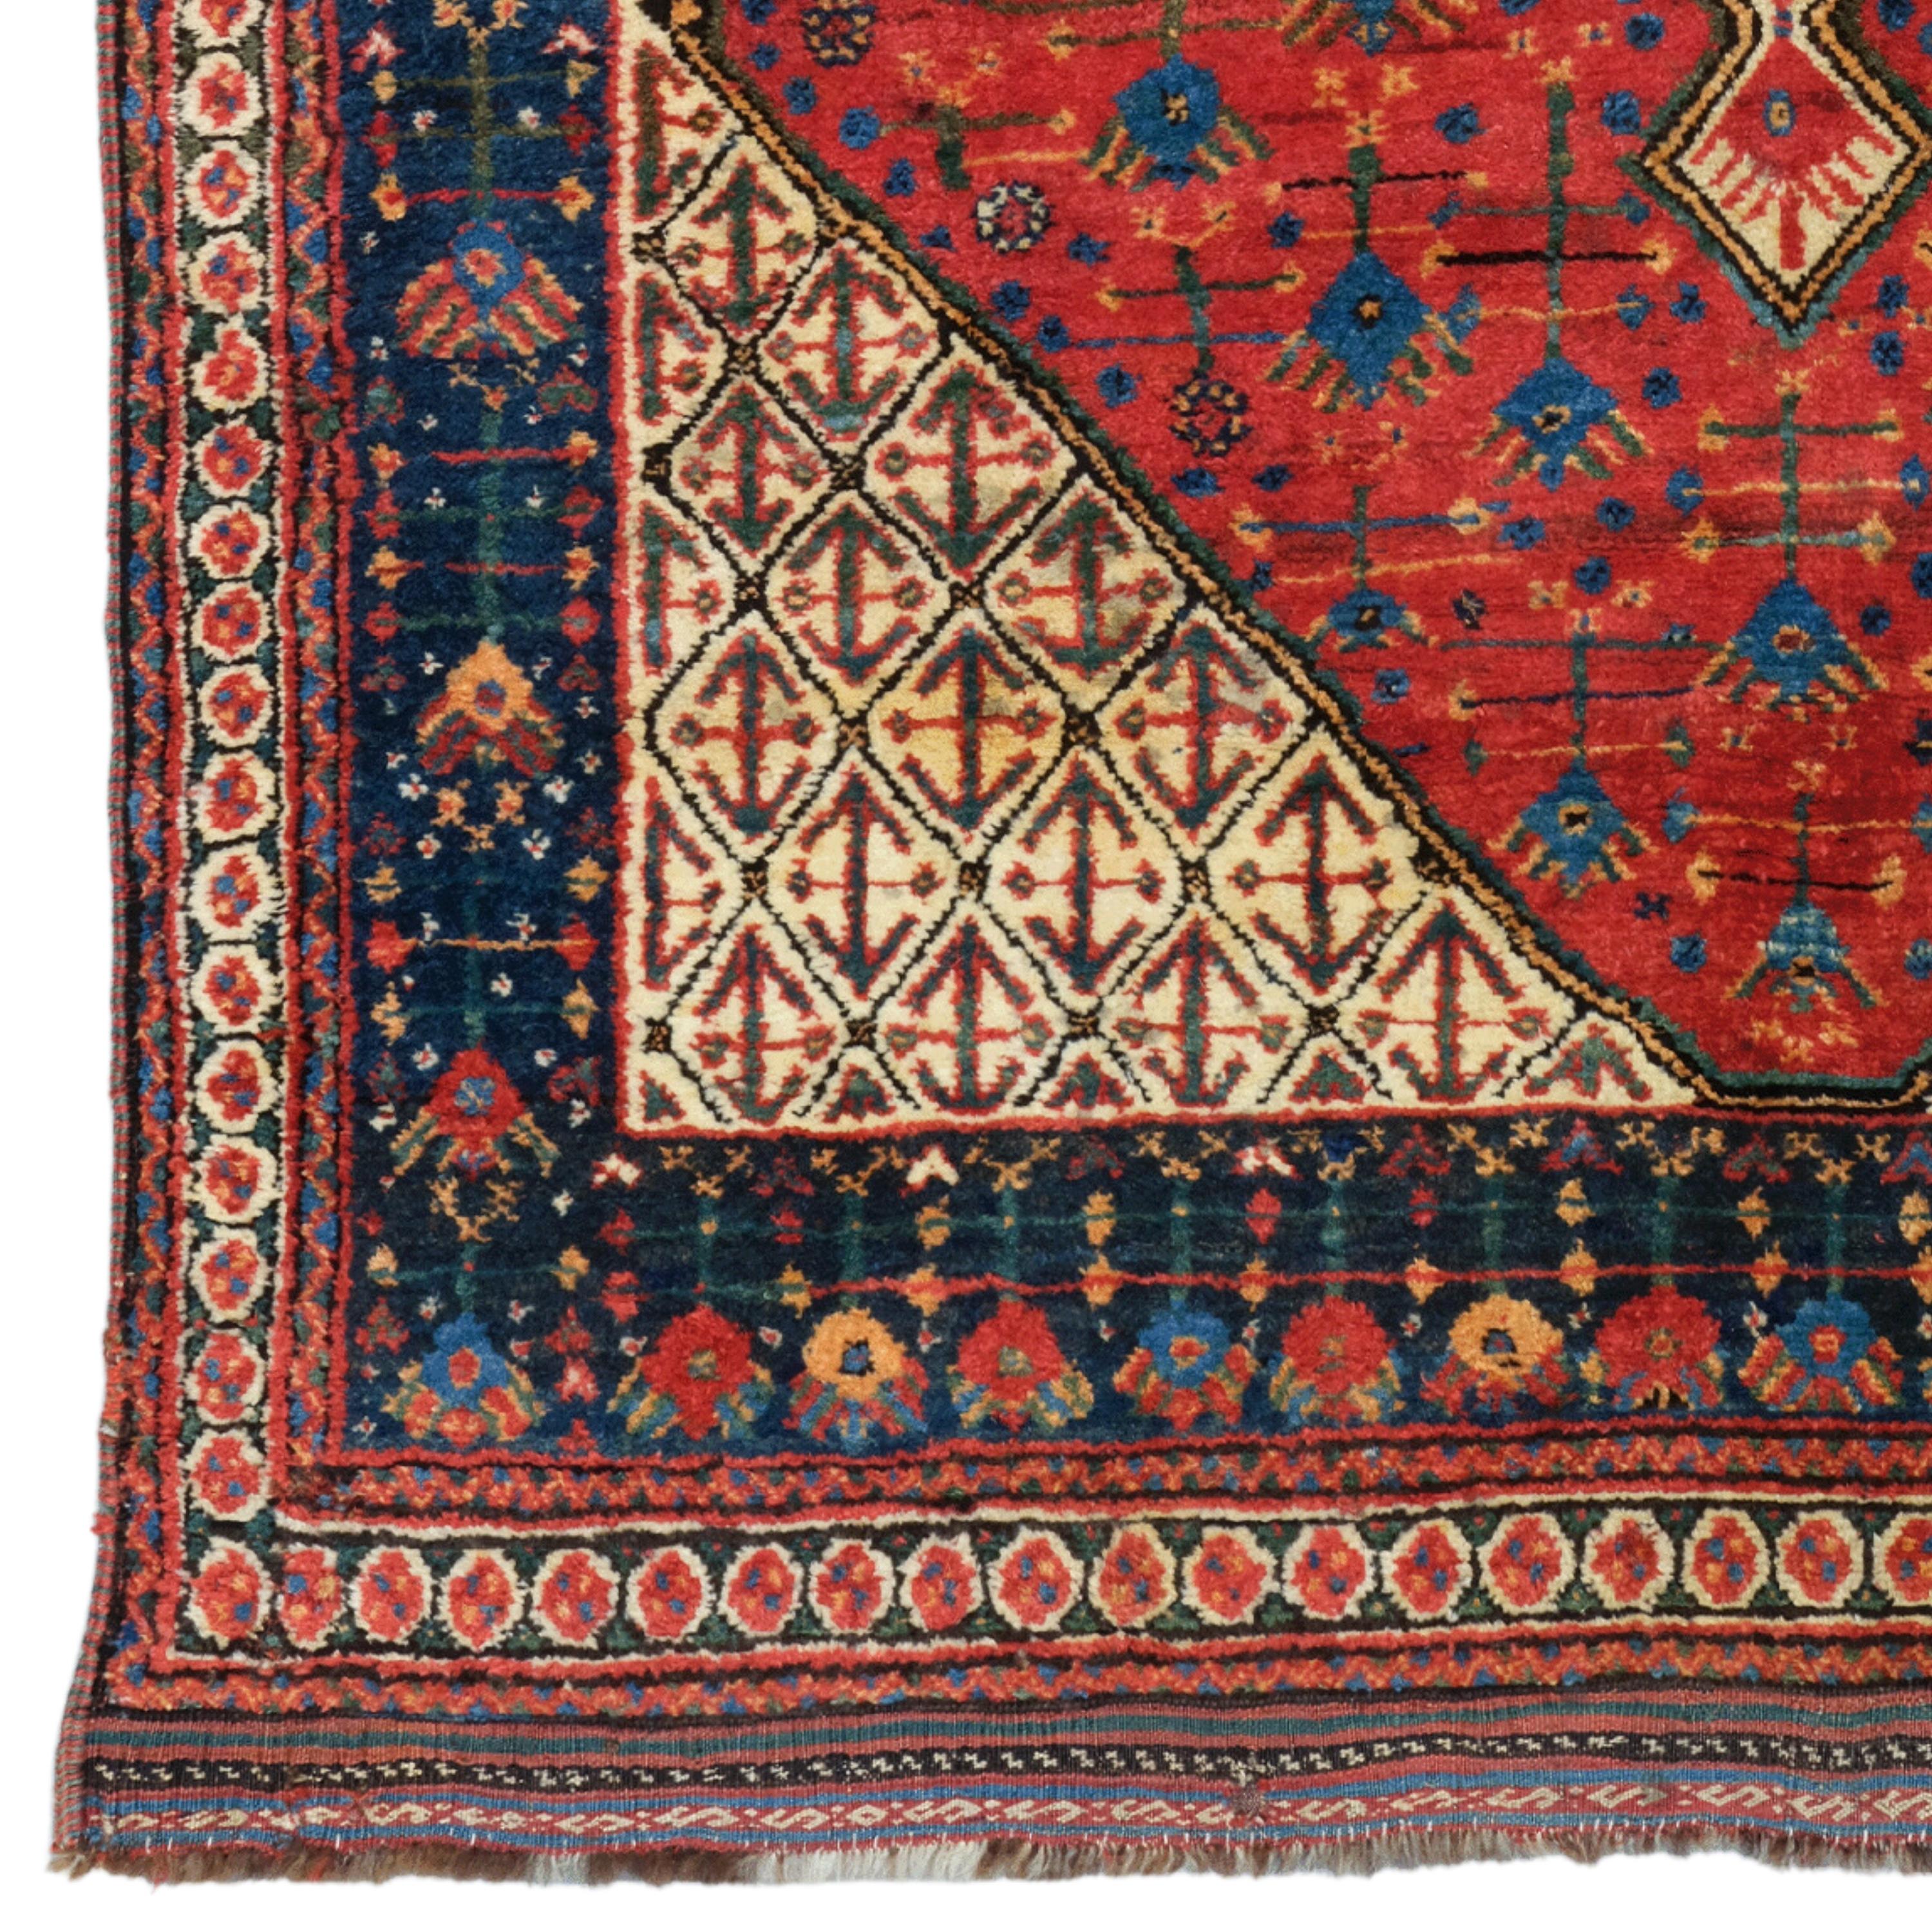 Antique Khamseh Rug - 19th Century Khamseh Rug

The Magnificence of the Historical Texture This antique Khamseh carpet is a work of art from the 19th century. Set on a rich red background, the diamond-shaped medallion and the intricate geometric and